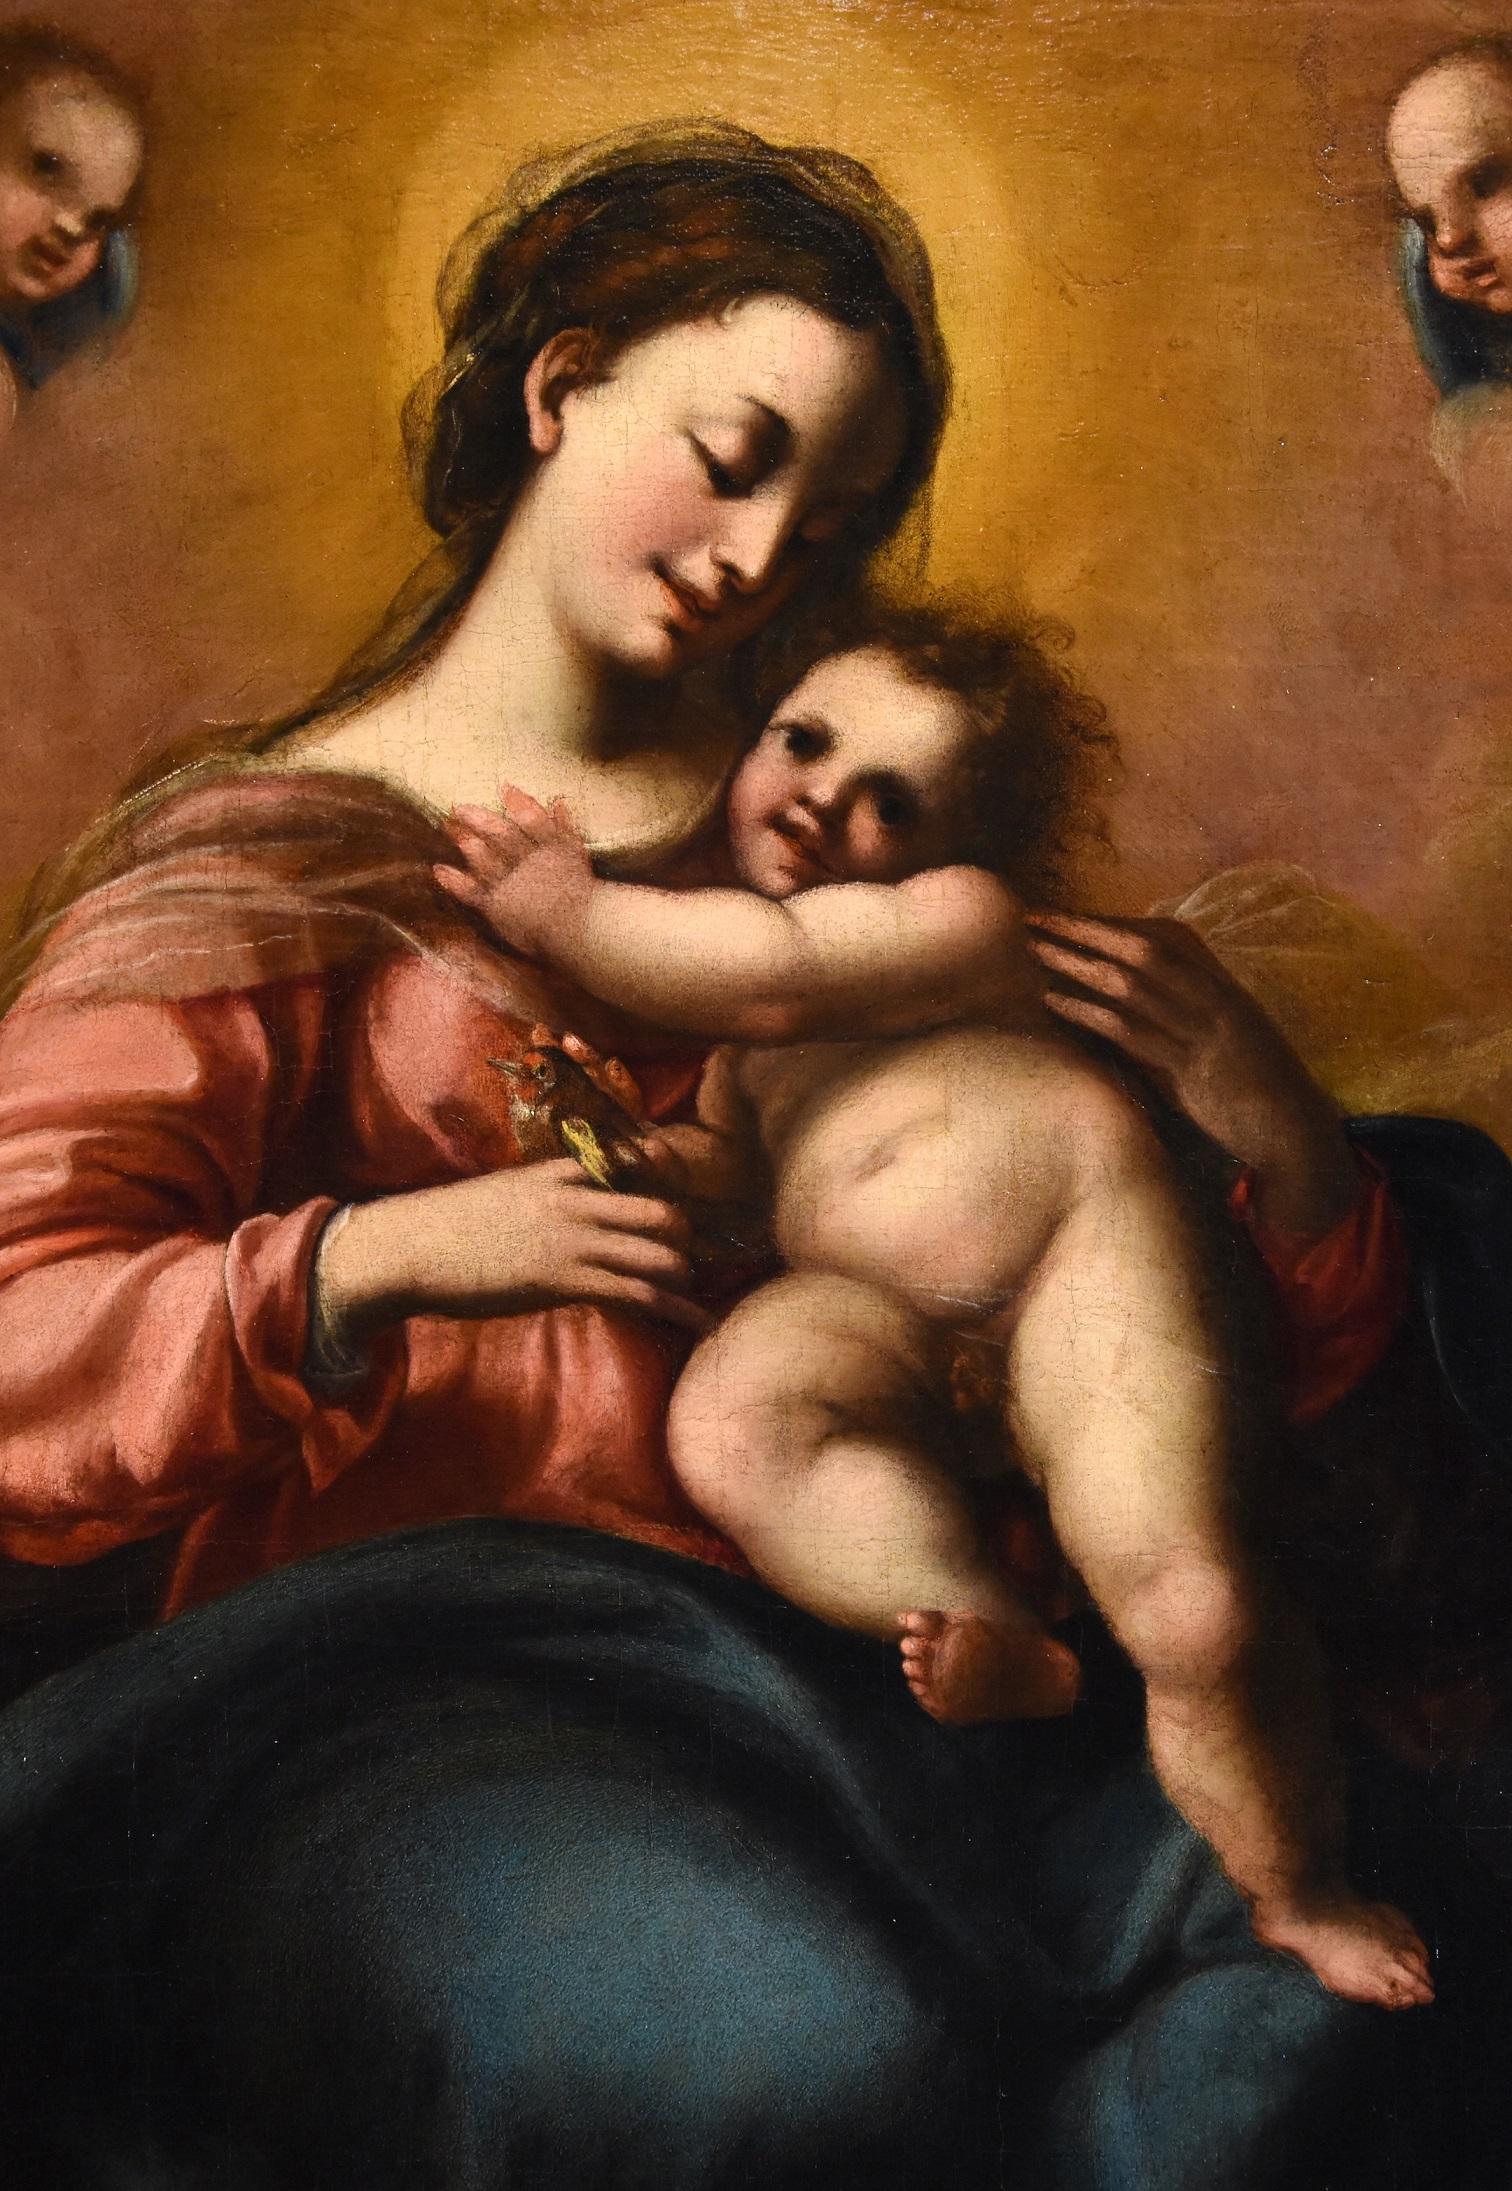 Jacopo Confortini (Florence 1602-1672)
Madonna and Child with Two Angels

Oil on canvas
80 x 60 cm./Framed 101 x 81 cm.

The proposed painting, datable to around the middle of the 17th century, depicts the Virgin enveloped in a golden glow and